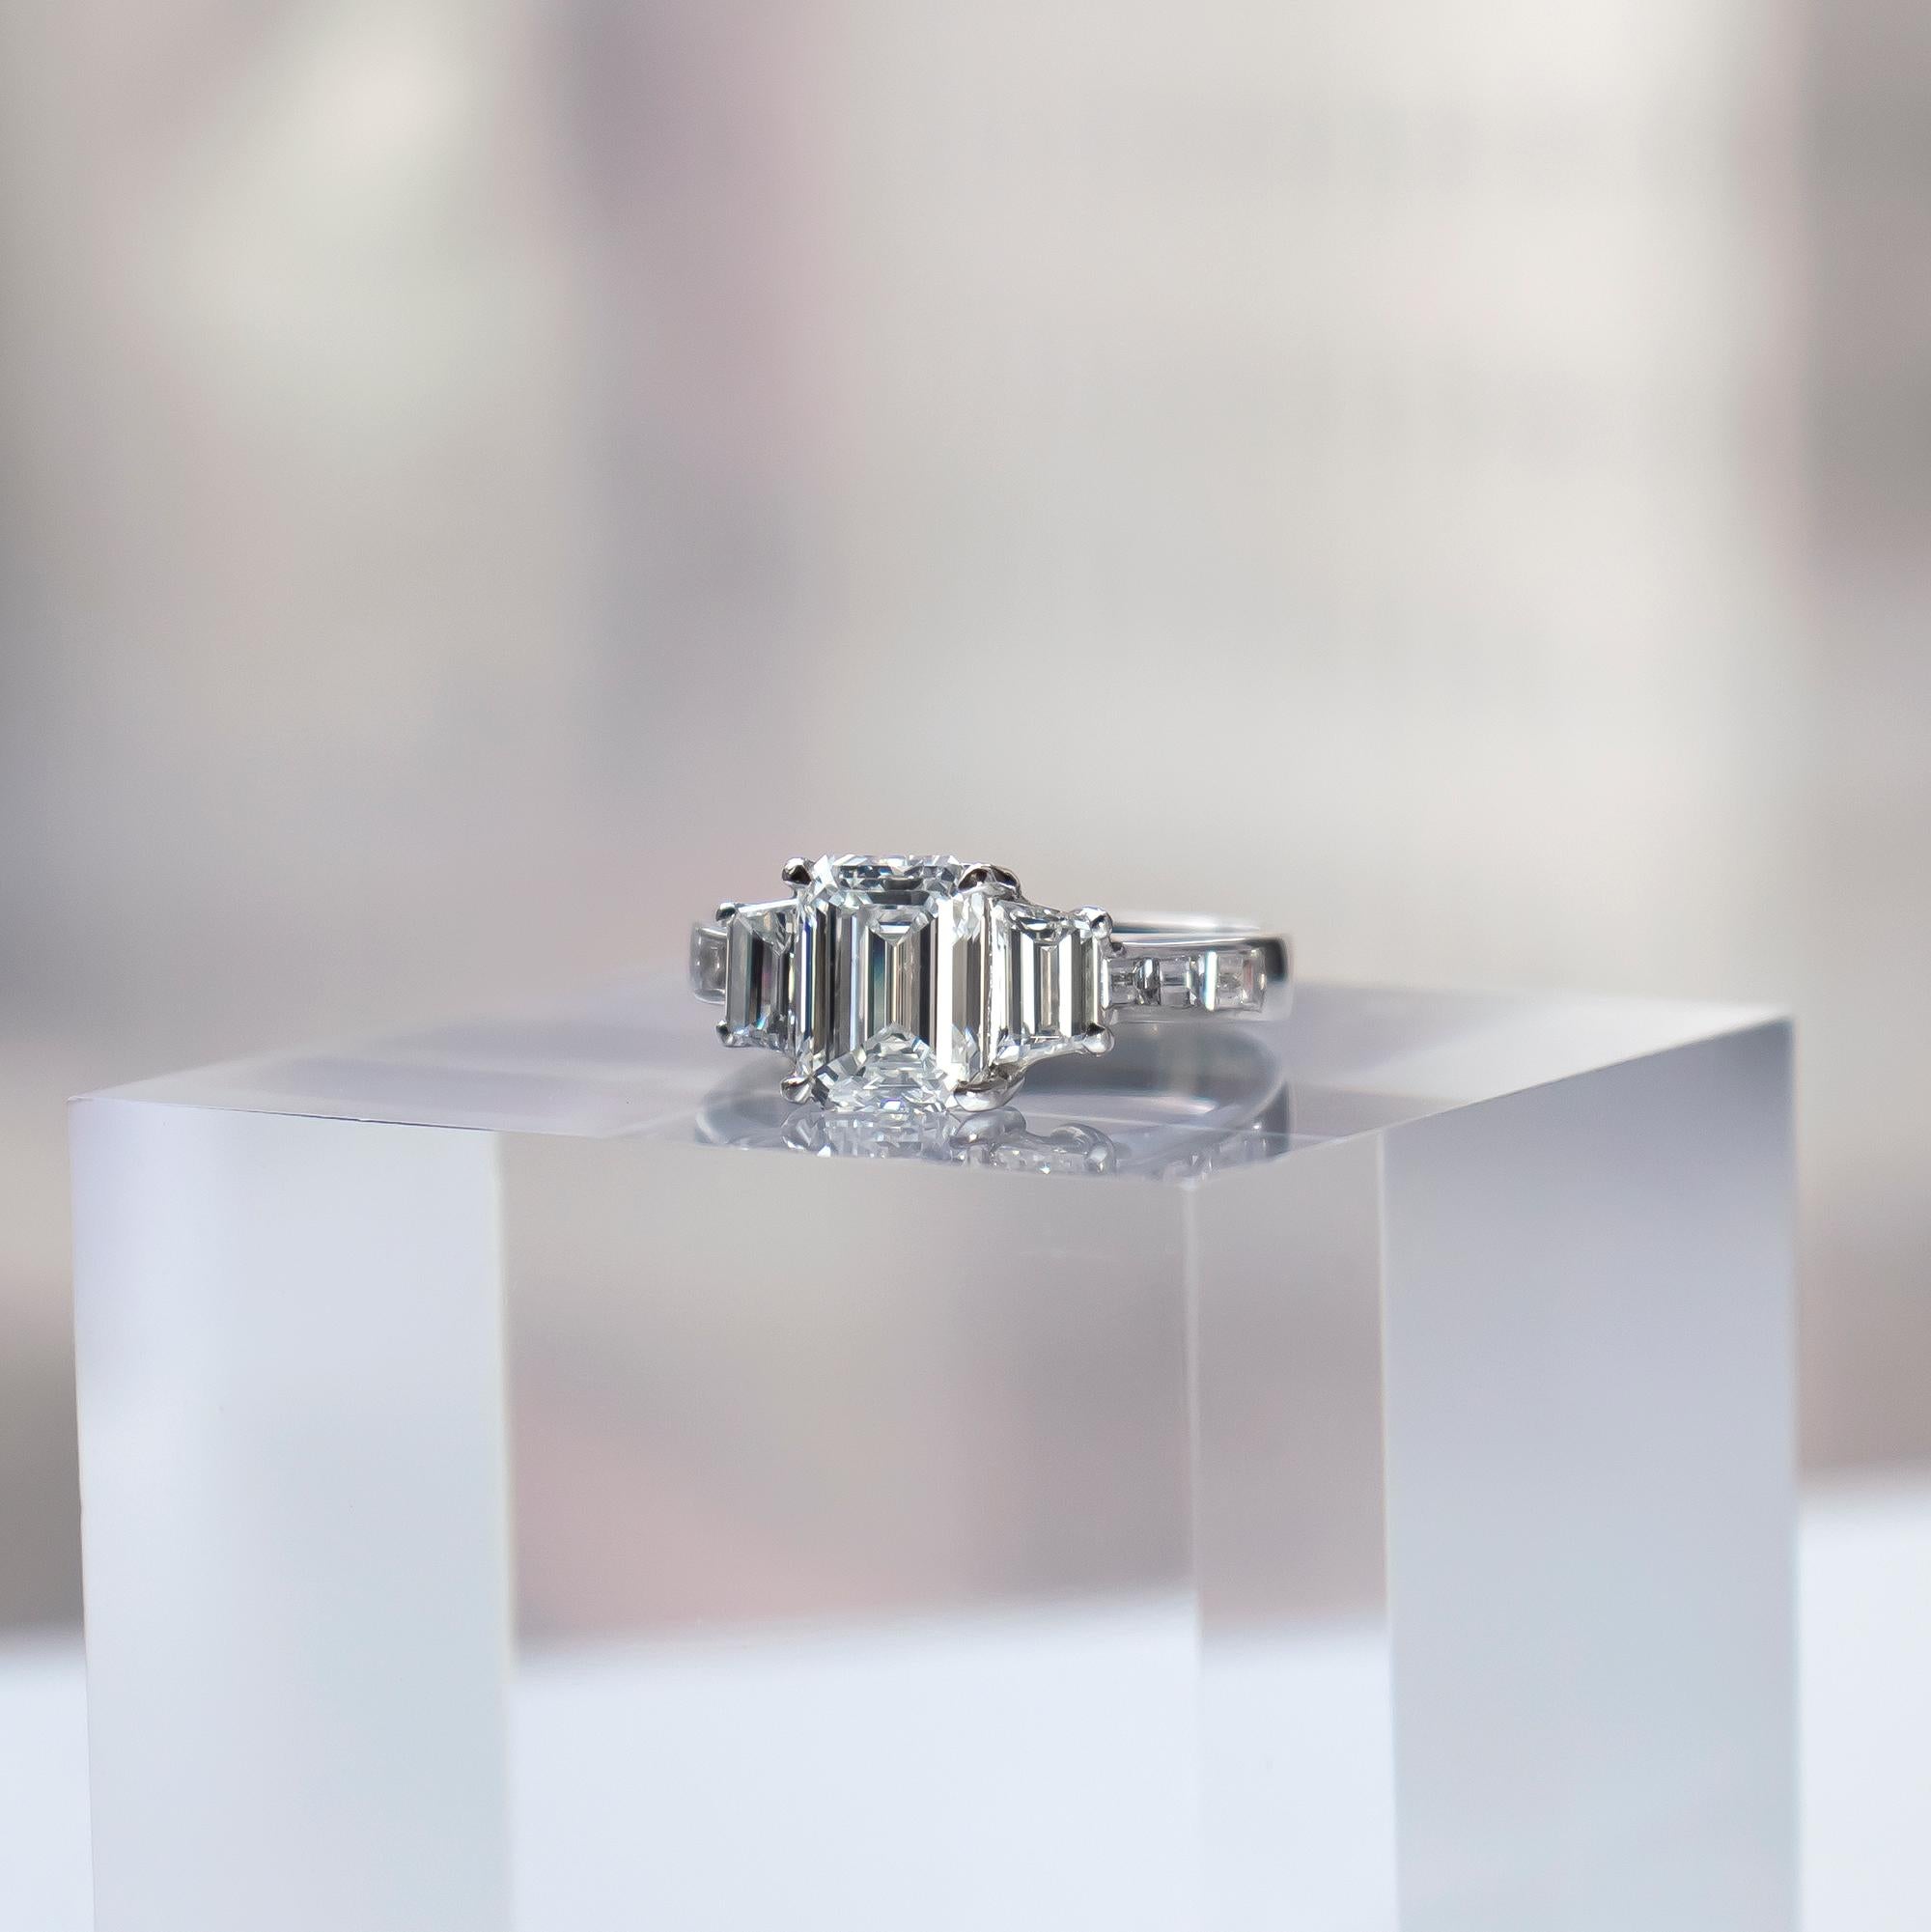 This handmade, three-stone ring recently acquired by the house of J. Birnbach features a natural, certified 1.61 carat emerald cut diamond of F color and VS2 clarity as described by GIA grading report # 1378269503. Flanked by a pair of beautifully